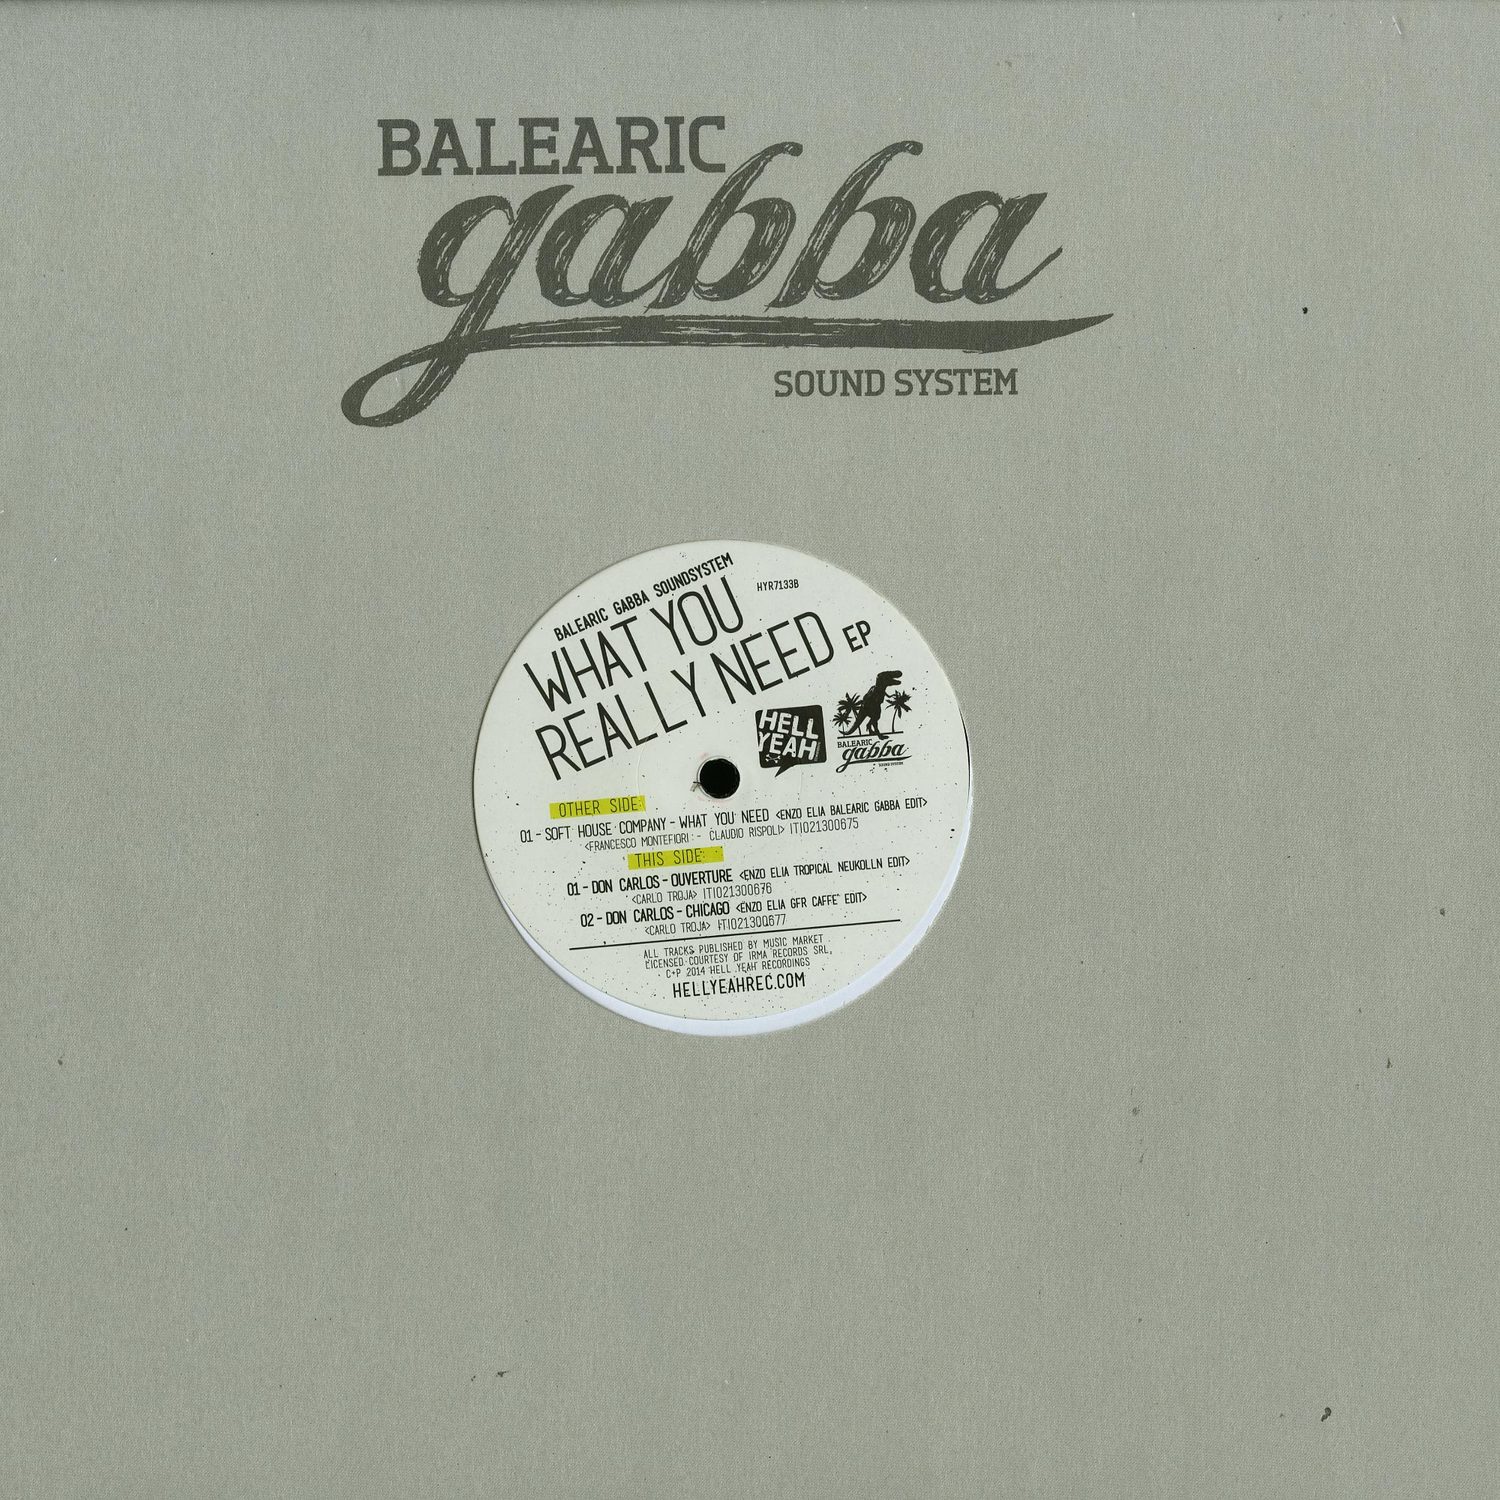 Balearic Gabby Sound System - WHAT YOU REALLY NEED EP